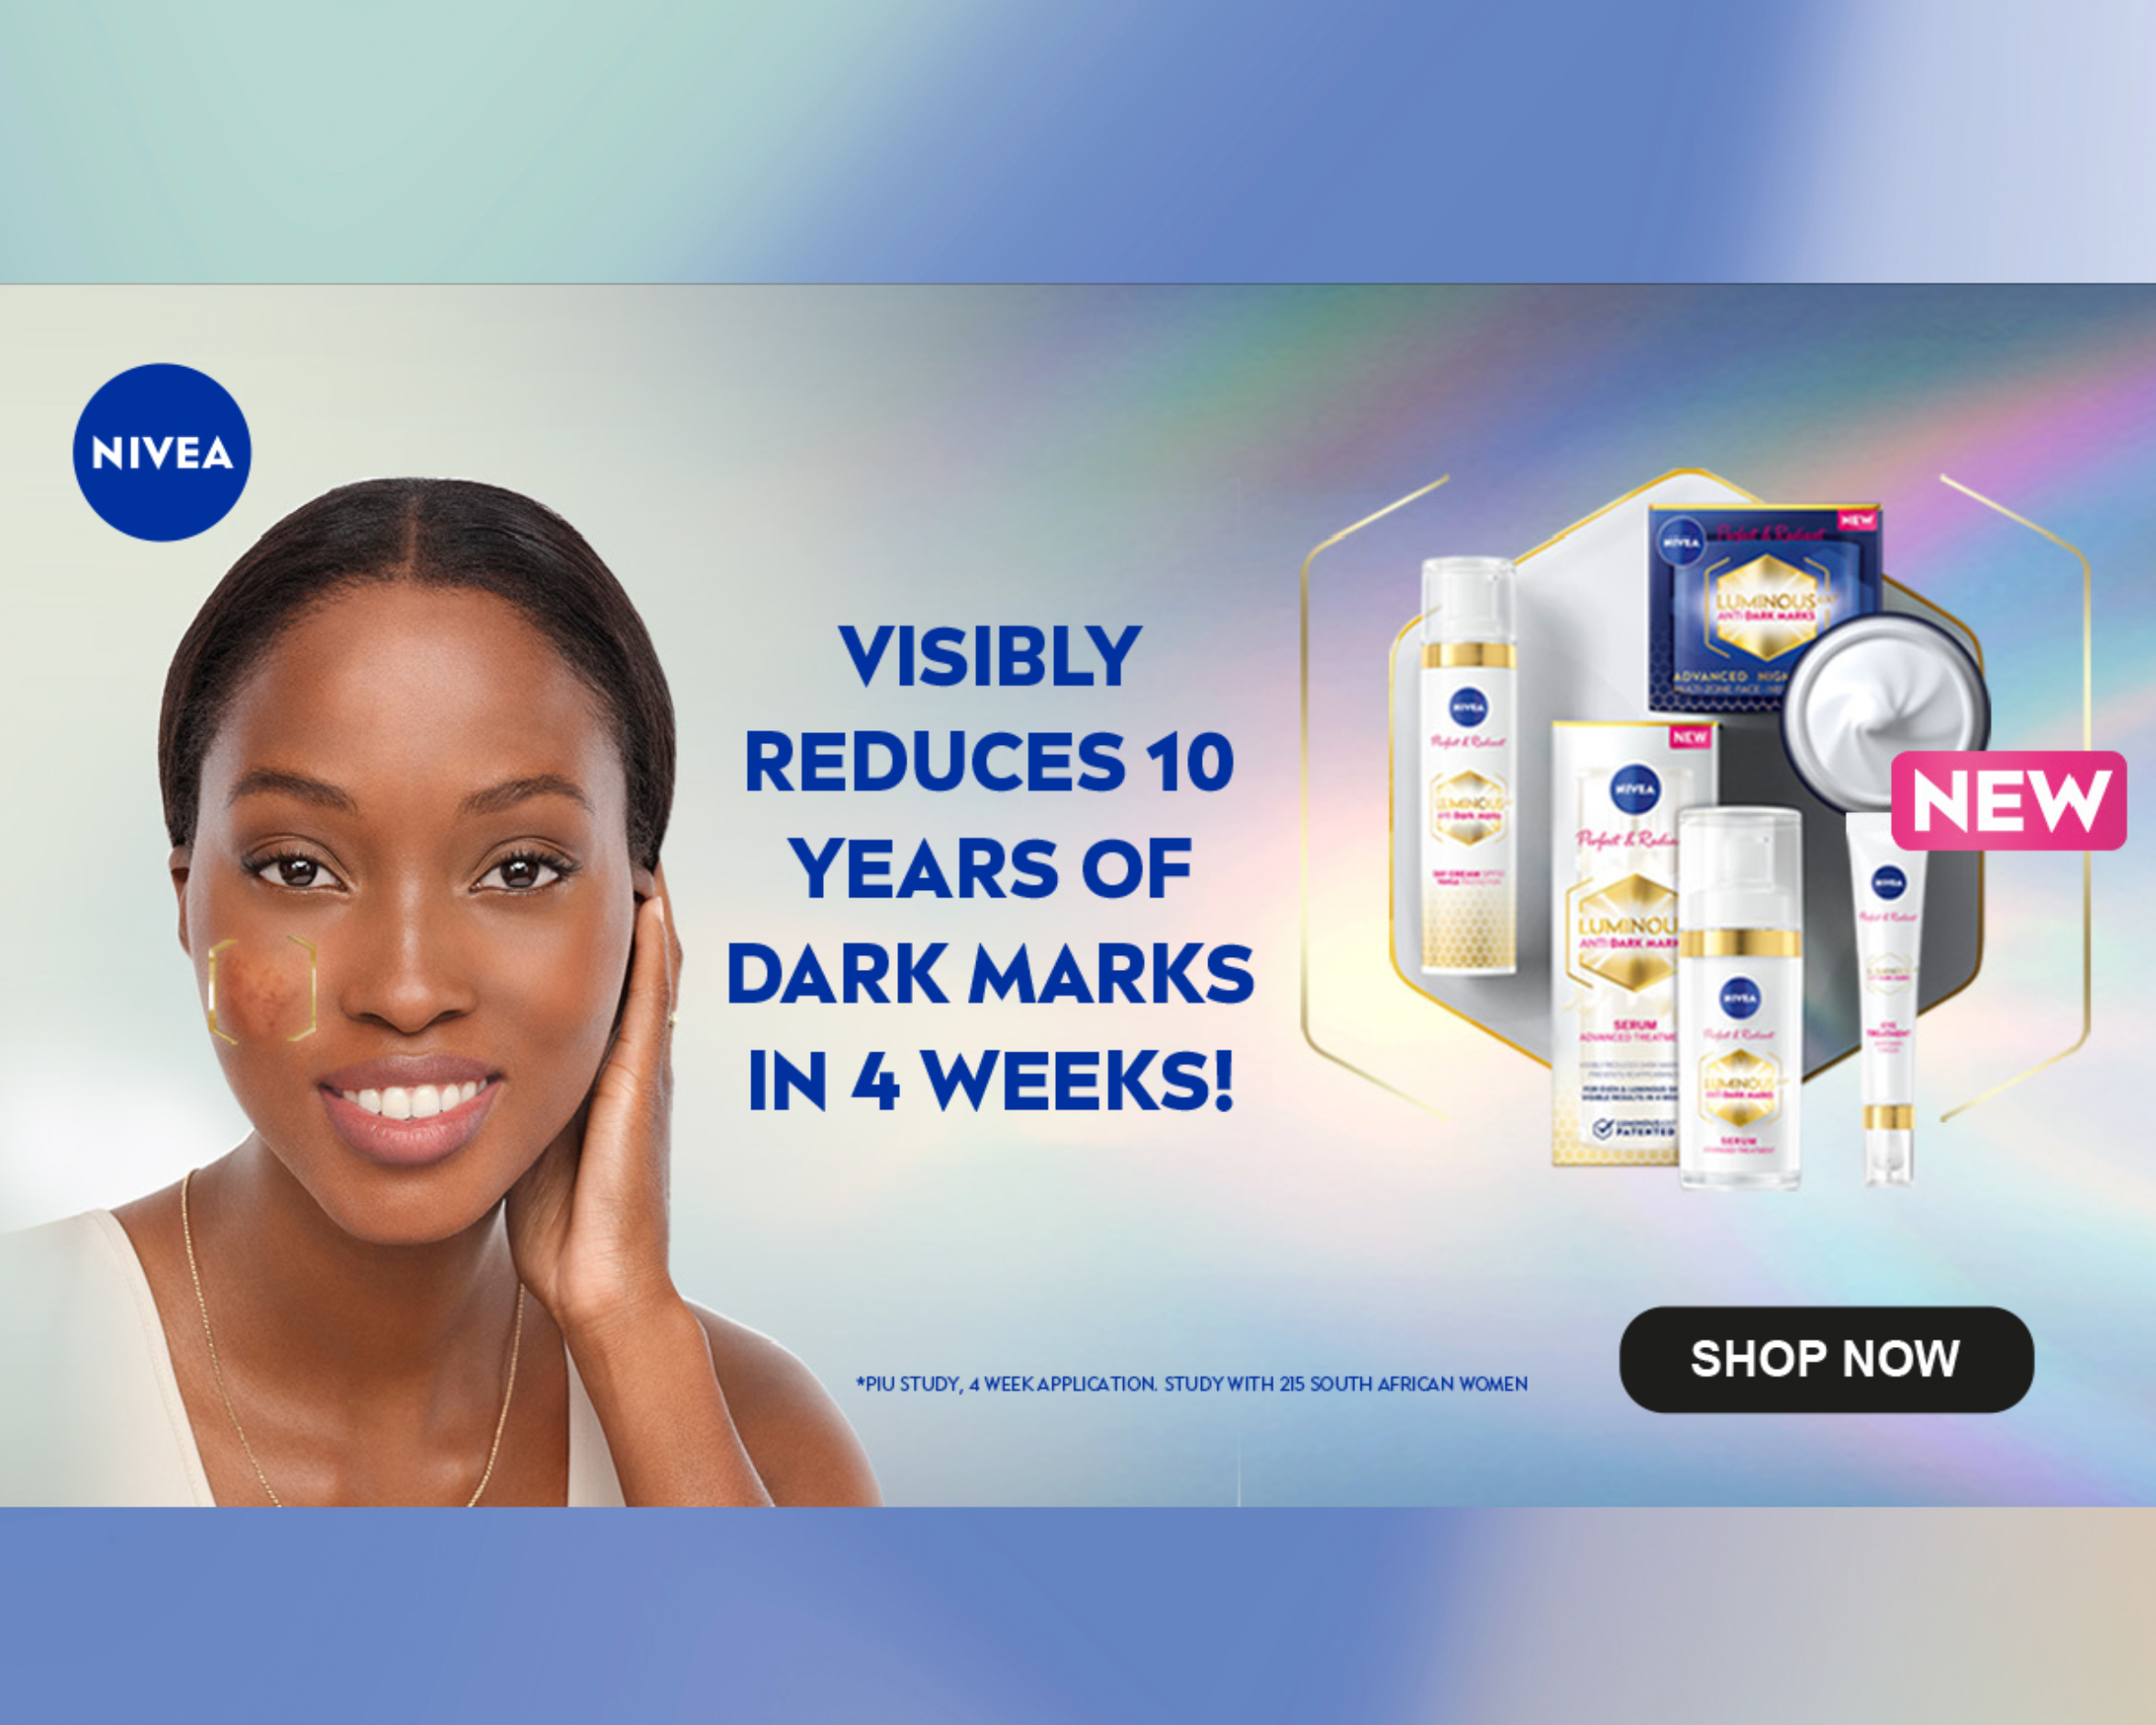 You are currently viewing The Power Of The NIVEA Luminous630 Range